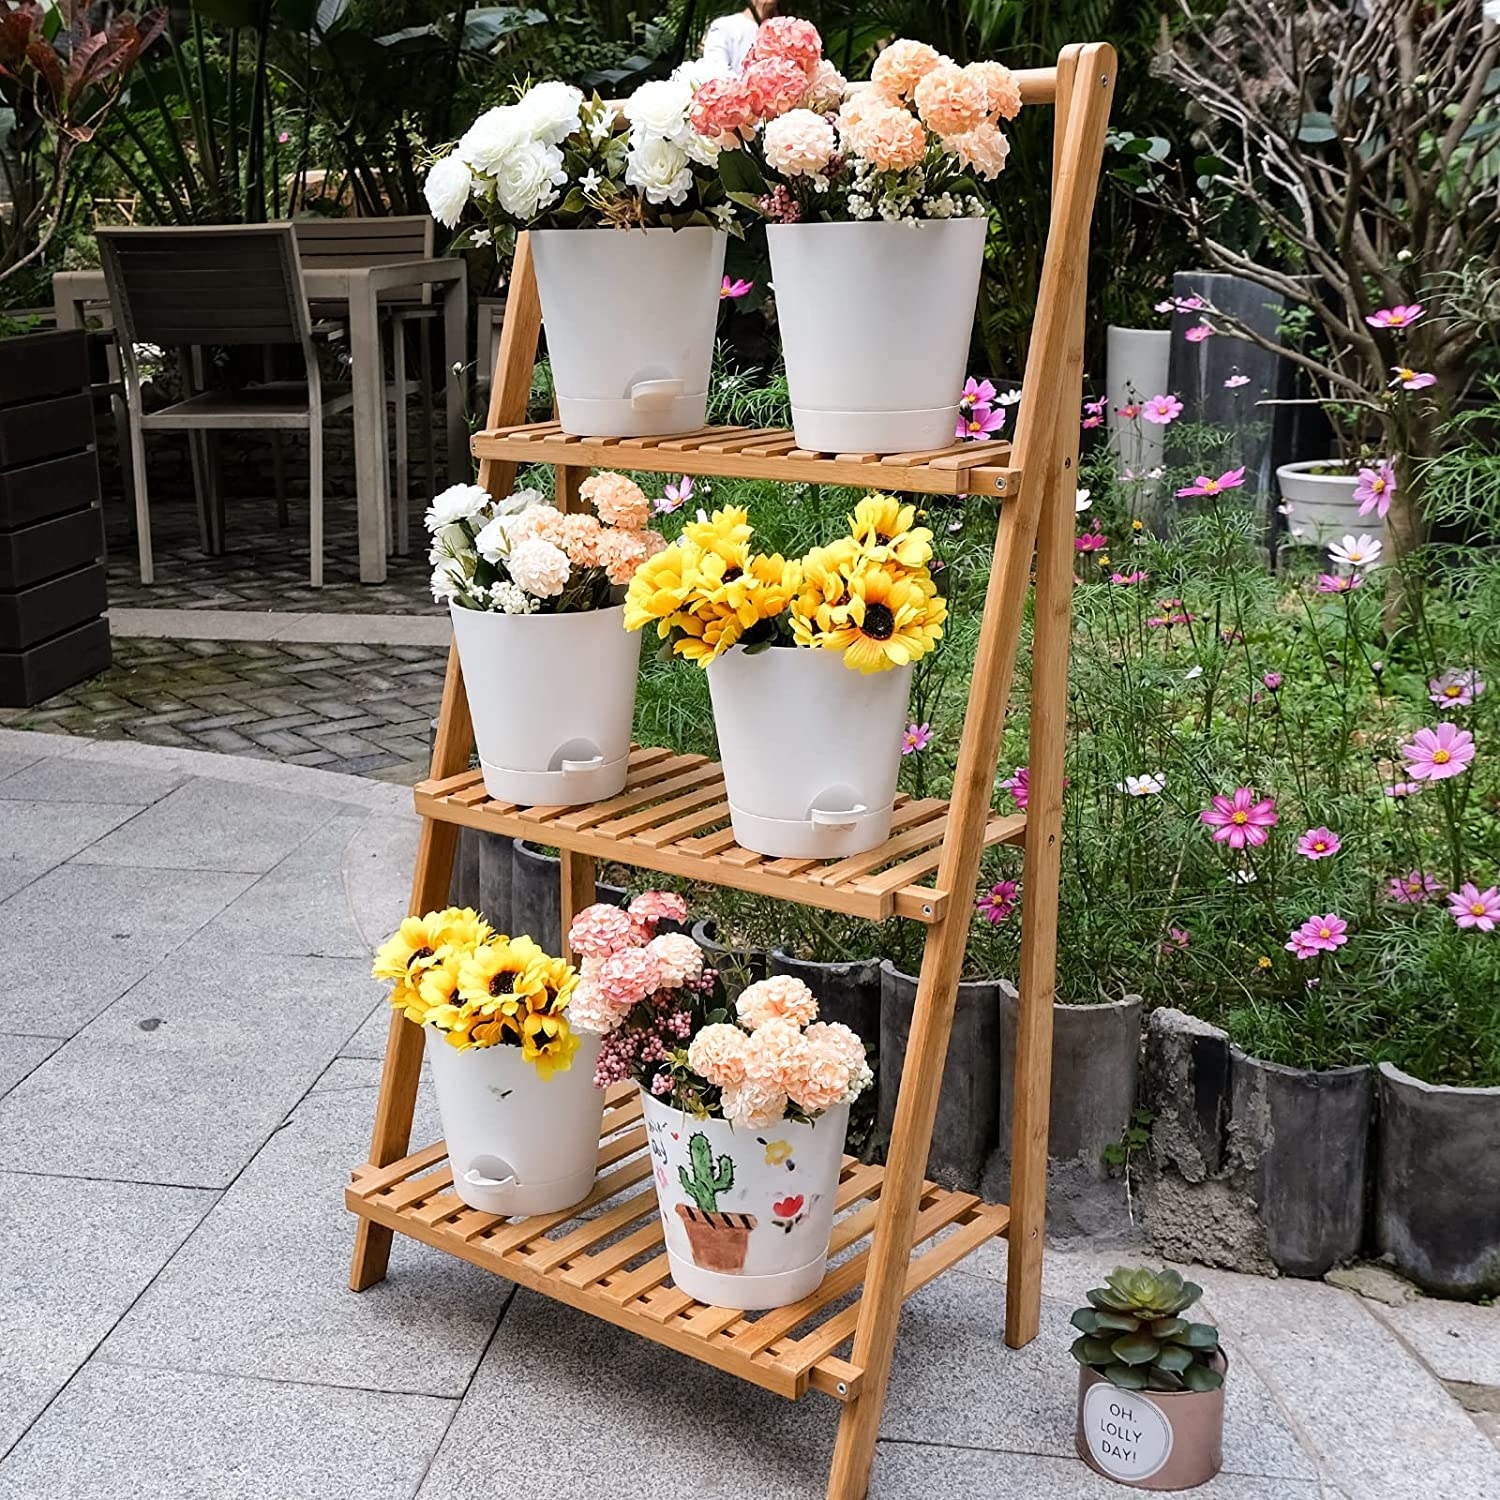 the six pots filled with flowers on a plant stand outside